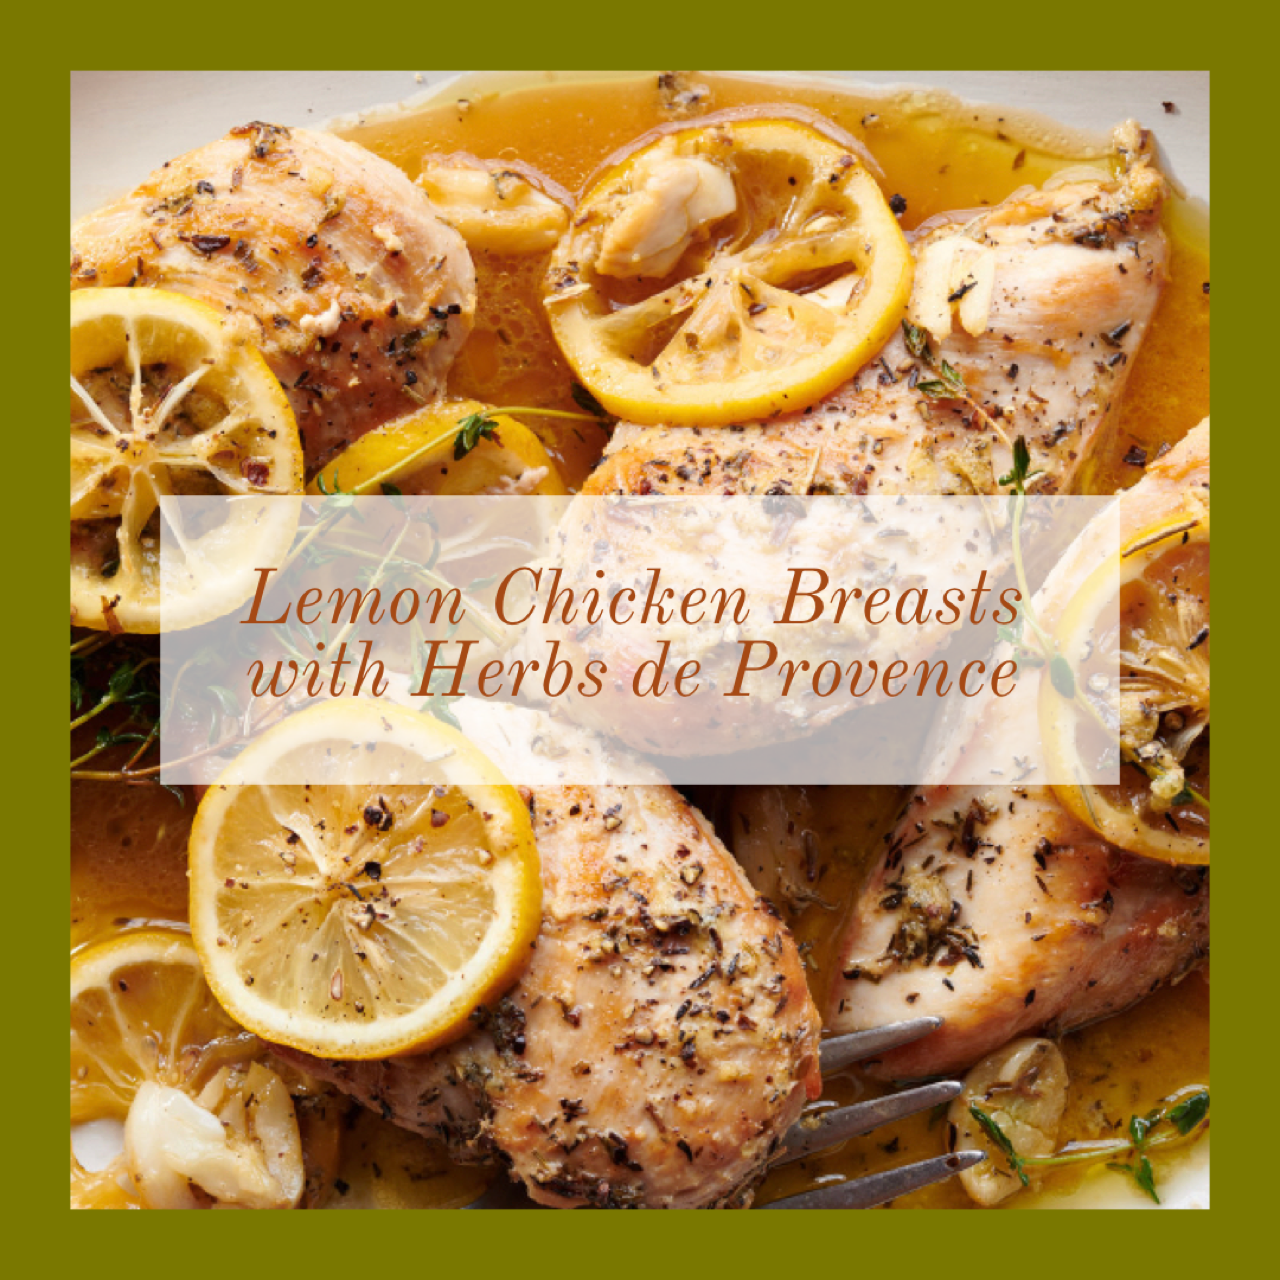 Lemon Chicken Breasts With Herbs de Provence